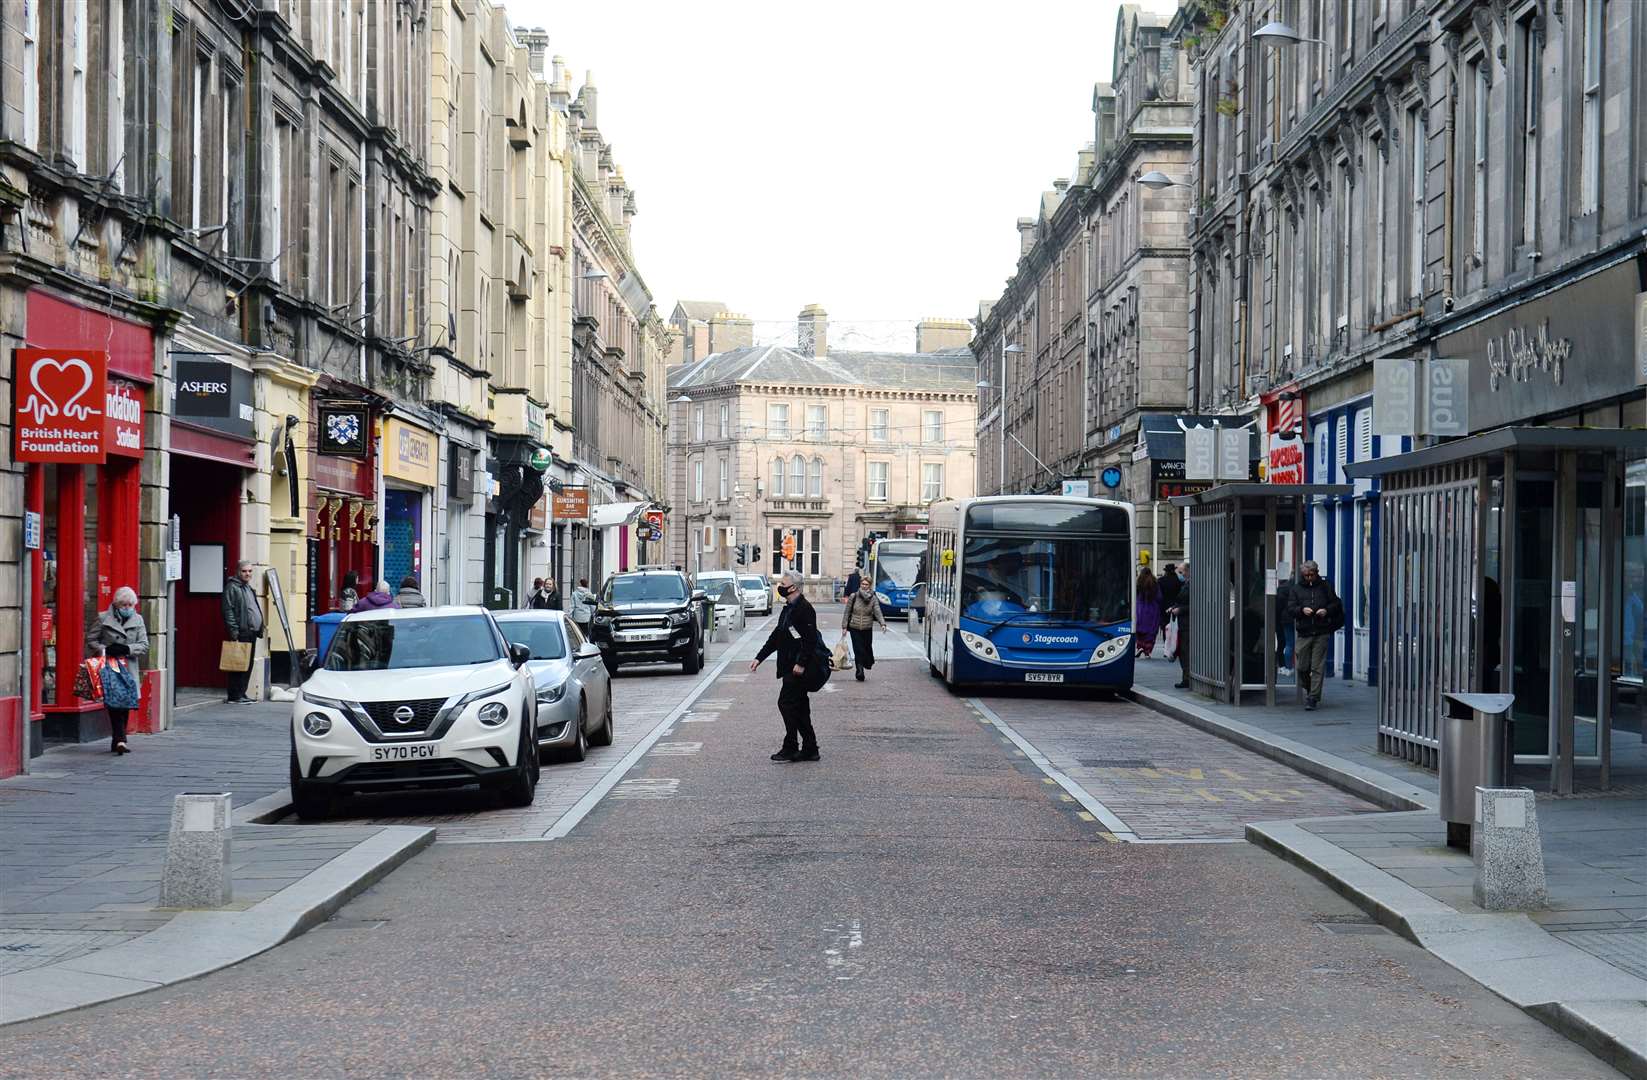 A suggestion that Union Street could be pedestrianised has attracted a broad range of views.